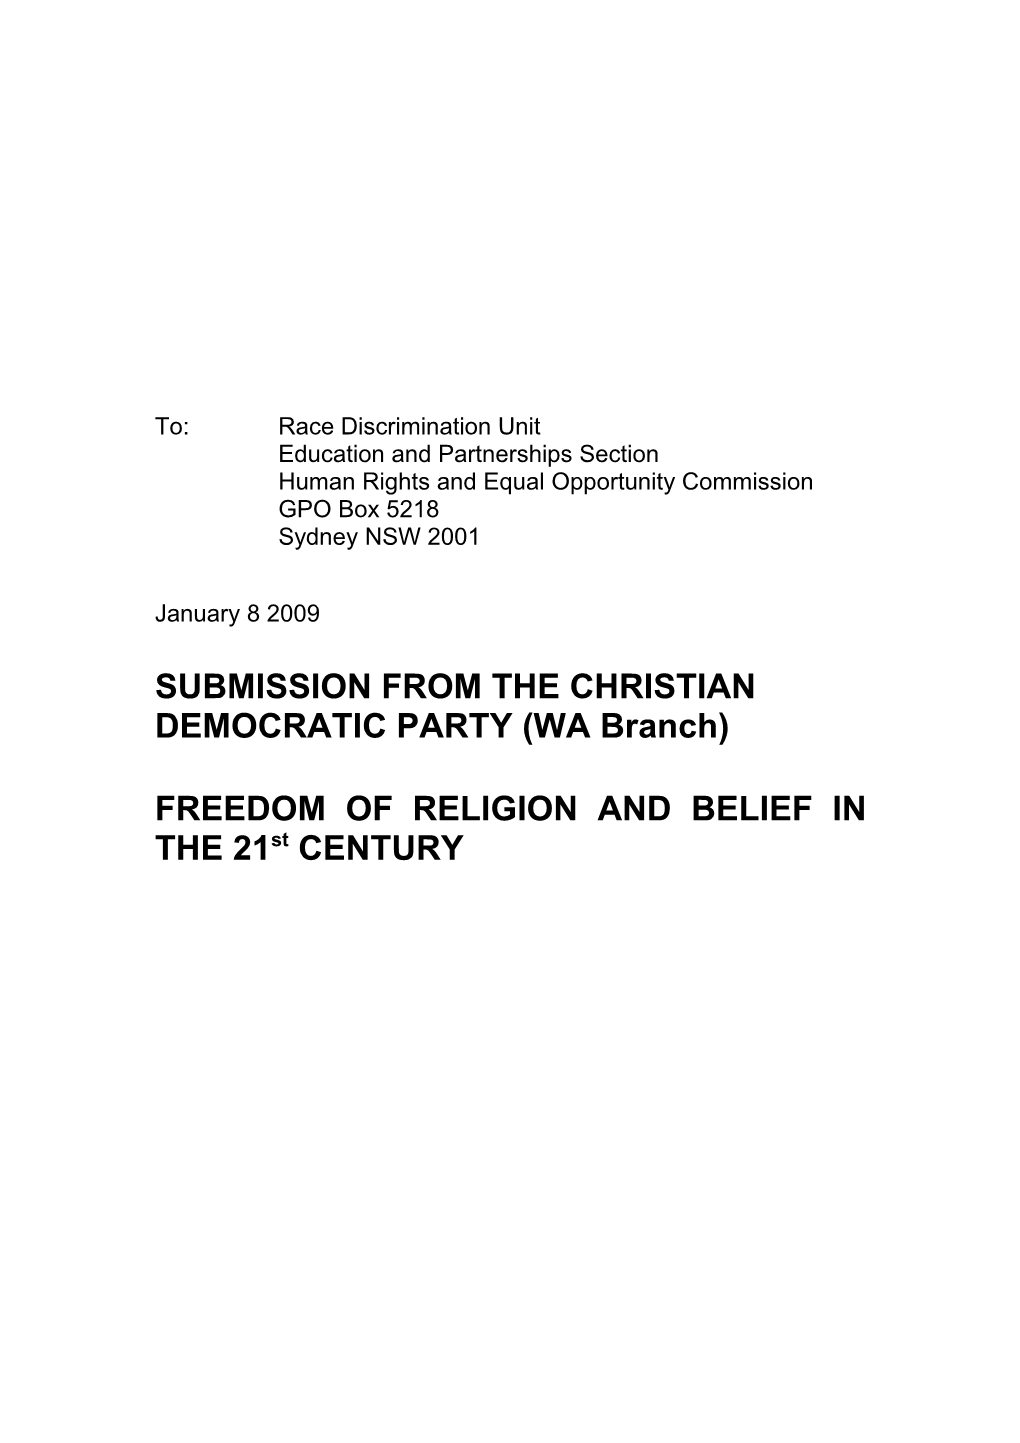 Submission on Freedom of Religion and Belief in the 21St Century